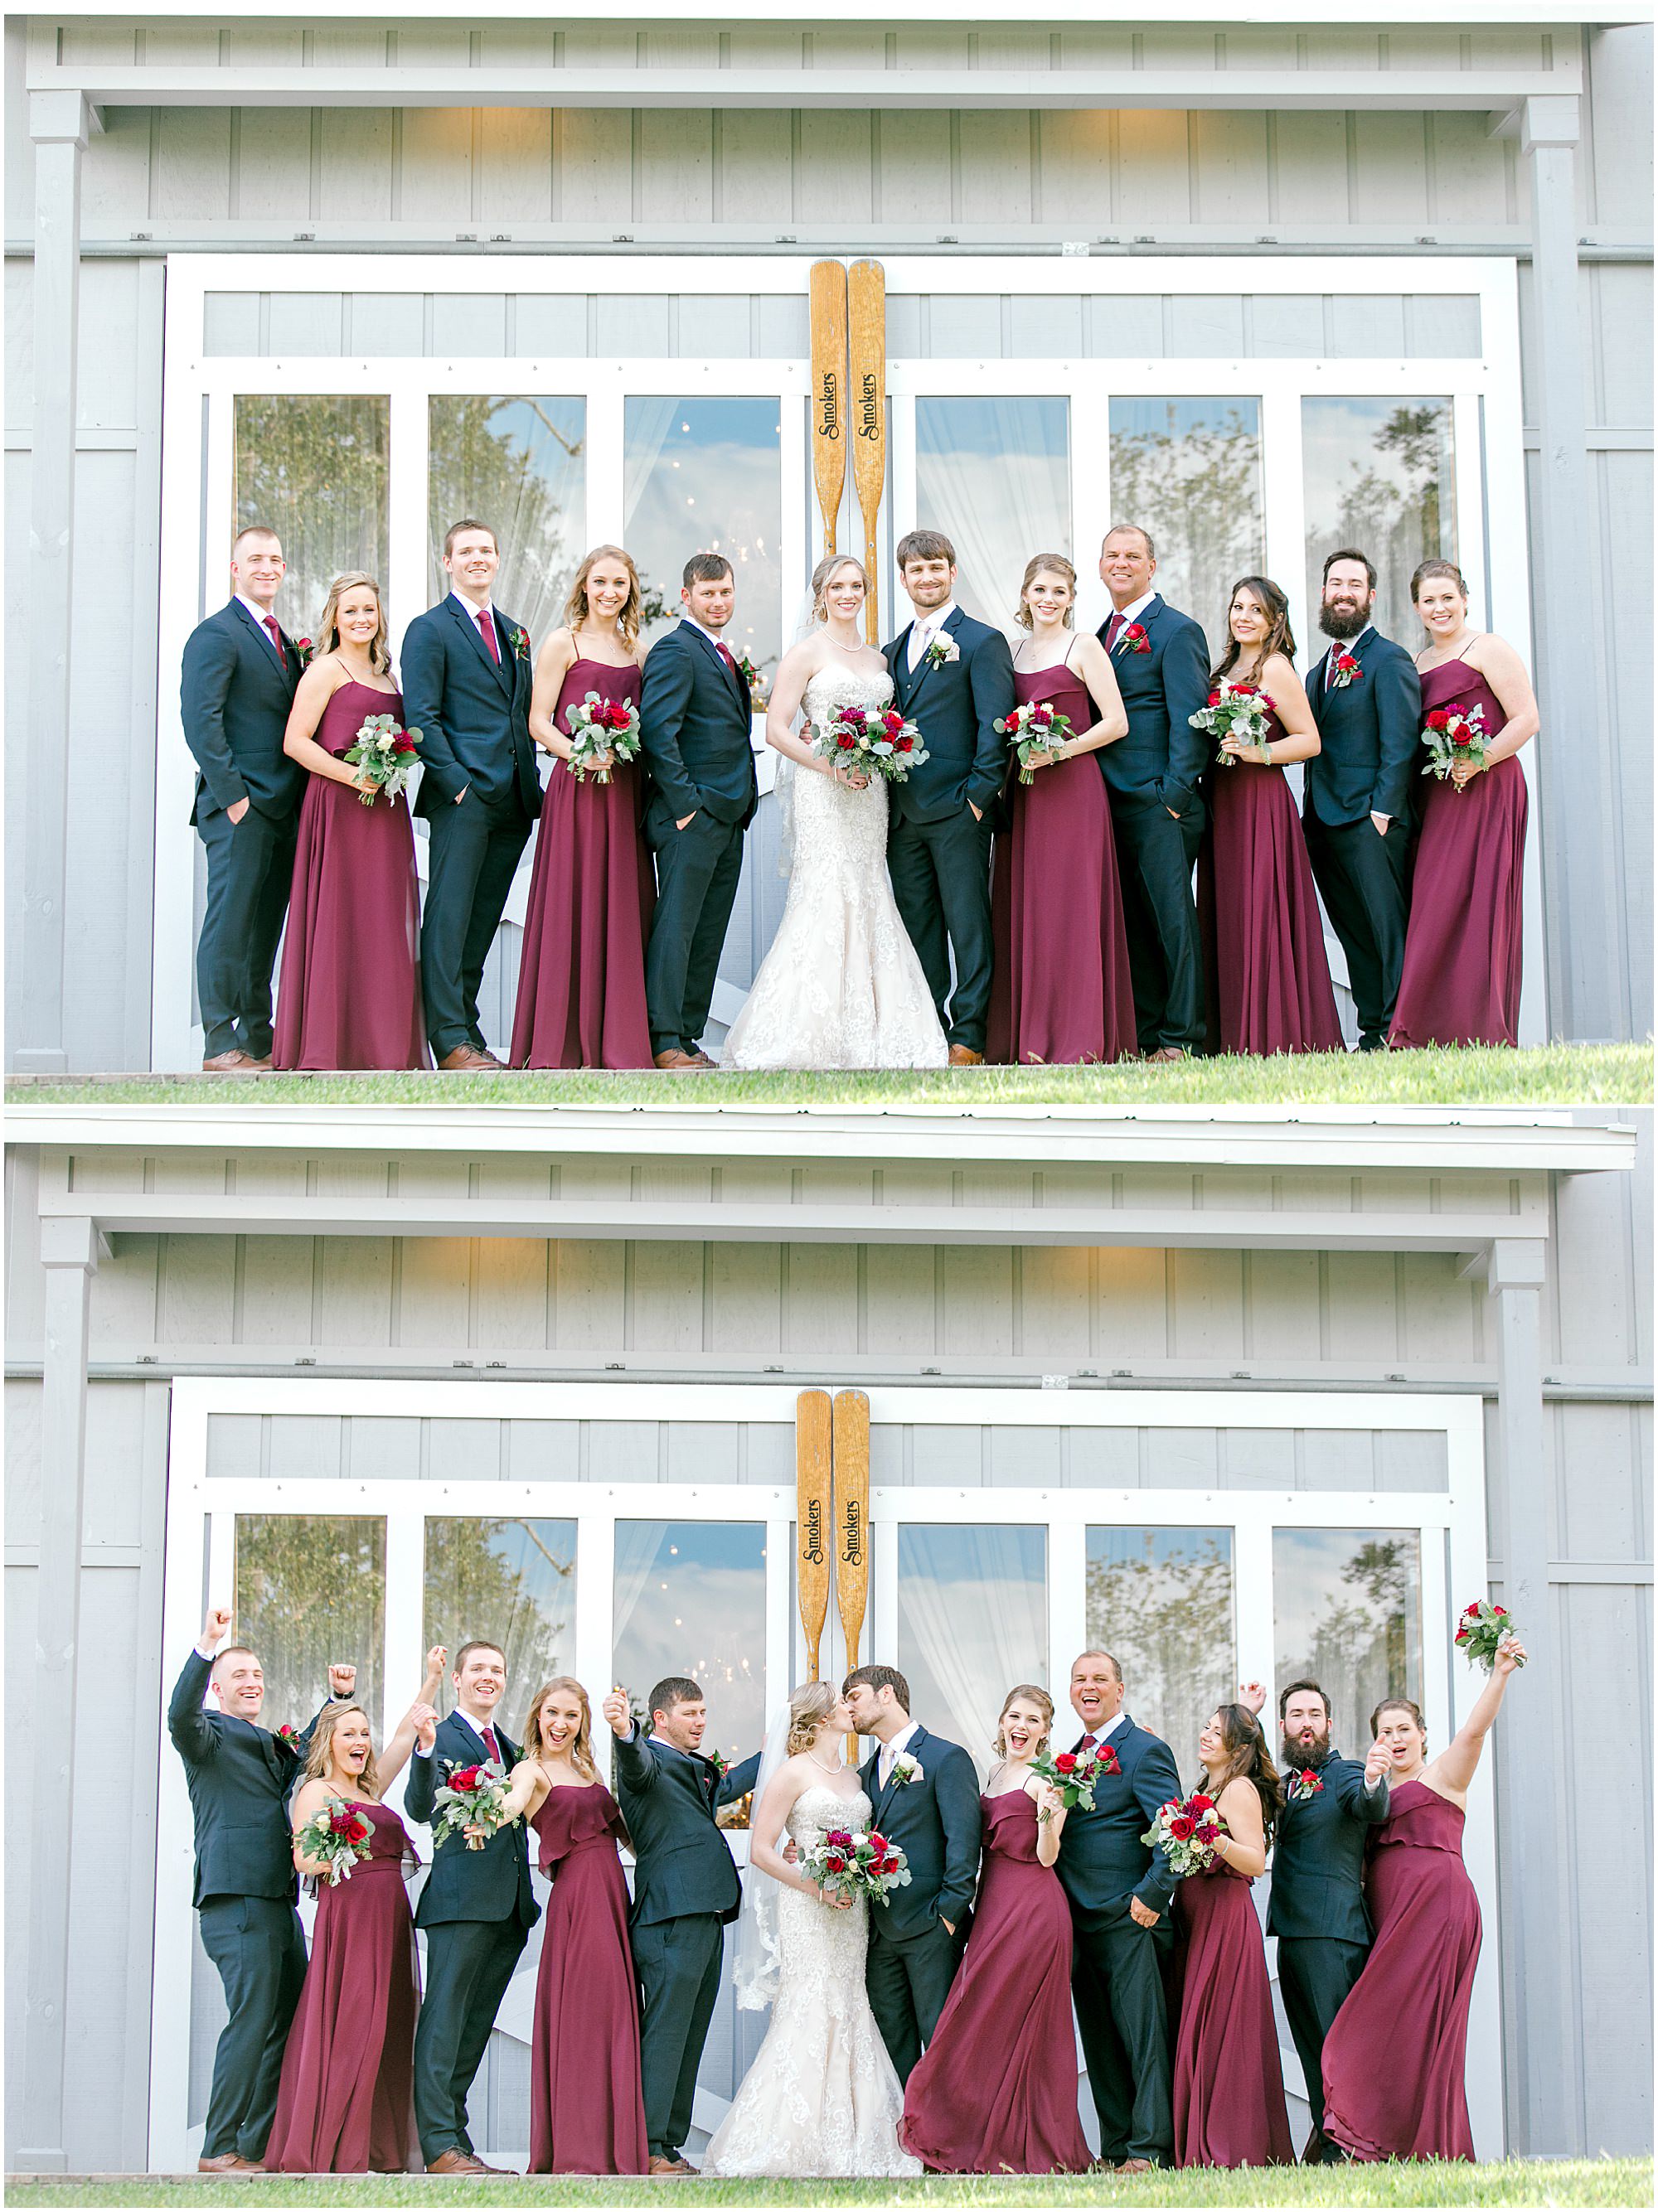 Wedding party taking photos in front of boat house doors